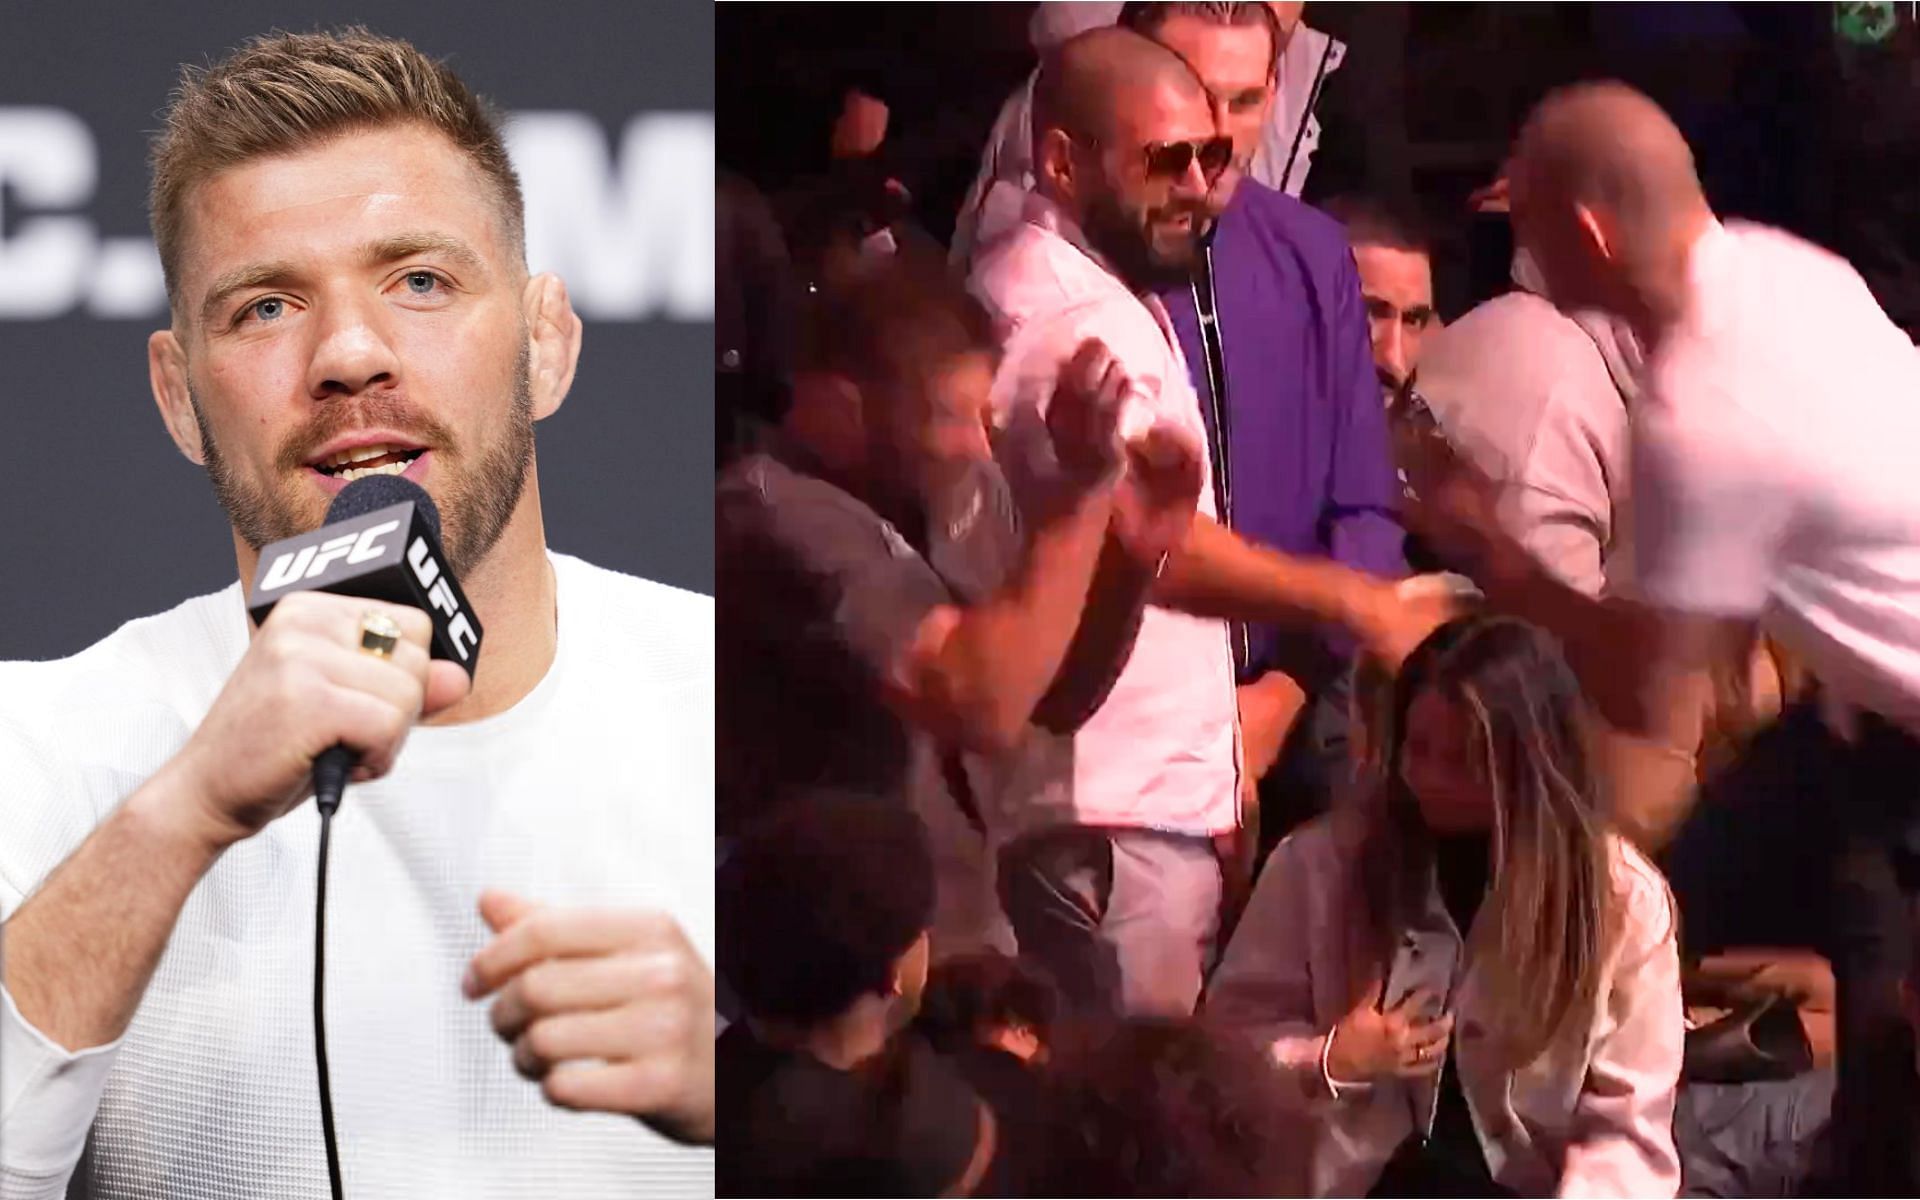 Dricus du Plessis (left) speaks out after UFC 296 brawl with Sean Strickland (right) [Images Courtesy: @GettyImages and @ufc on X]